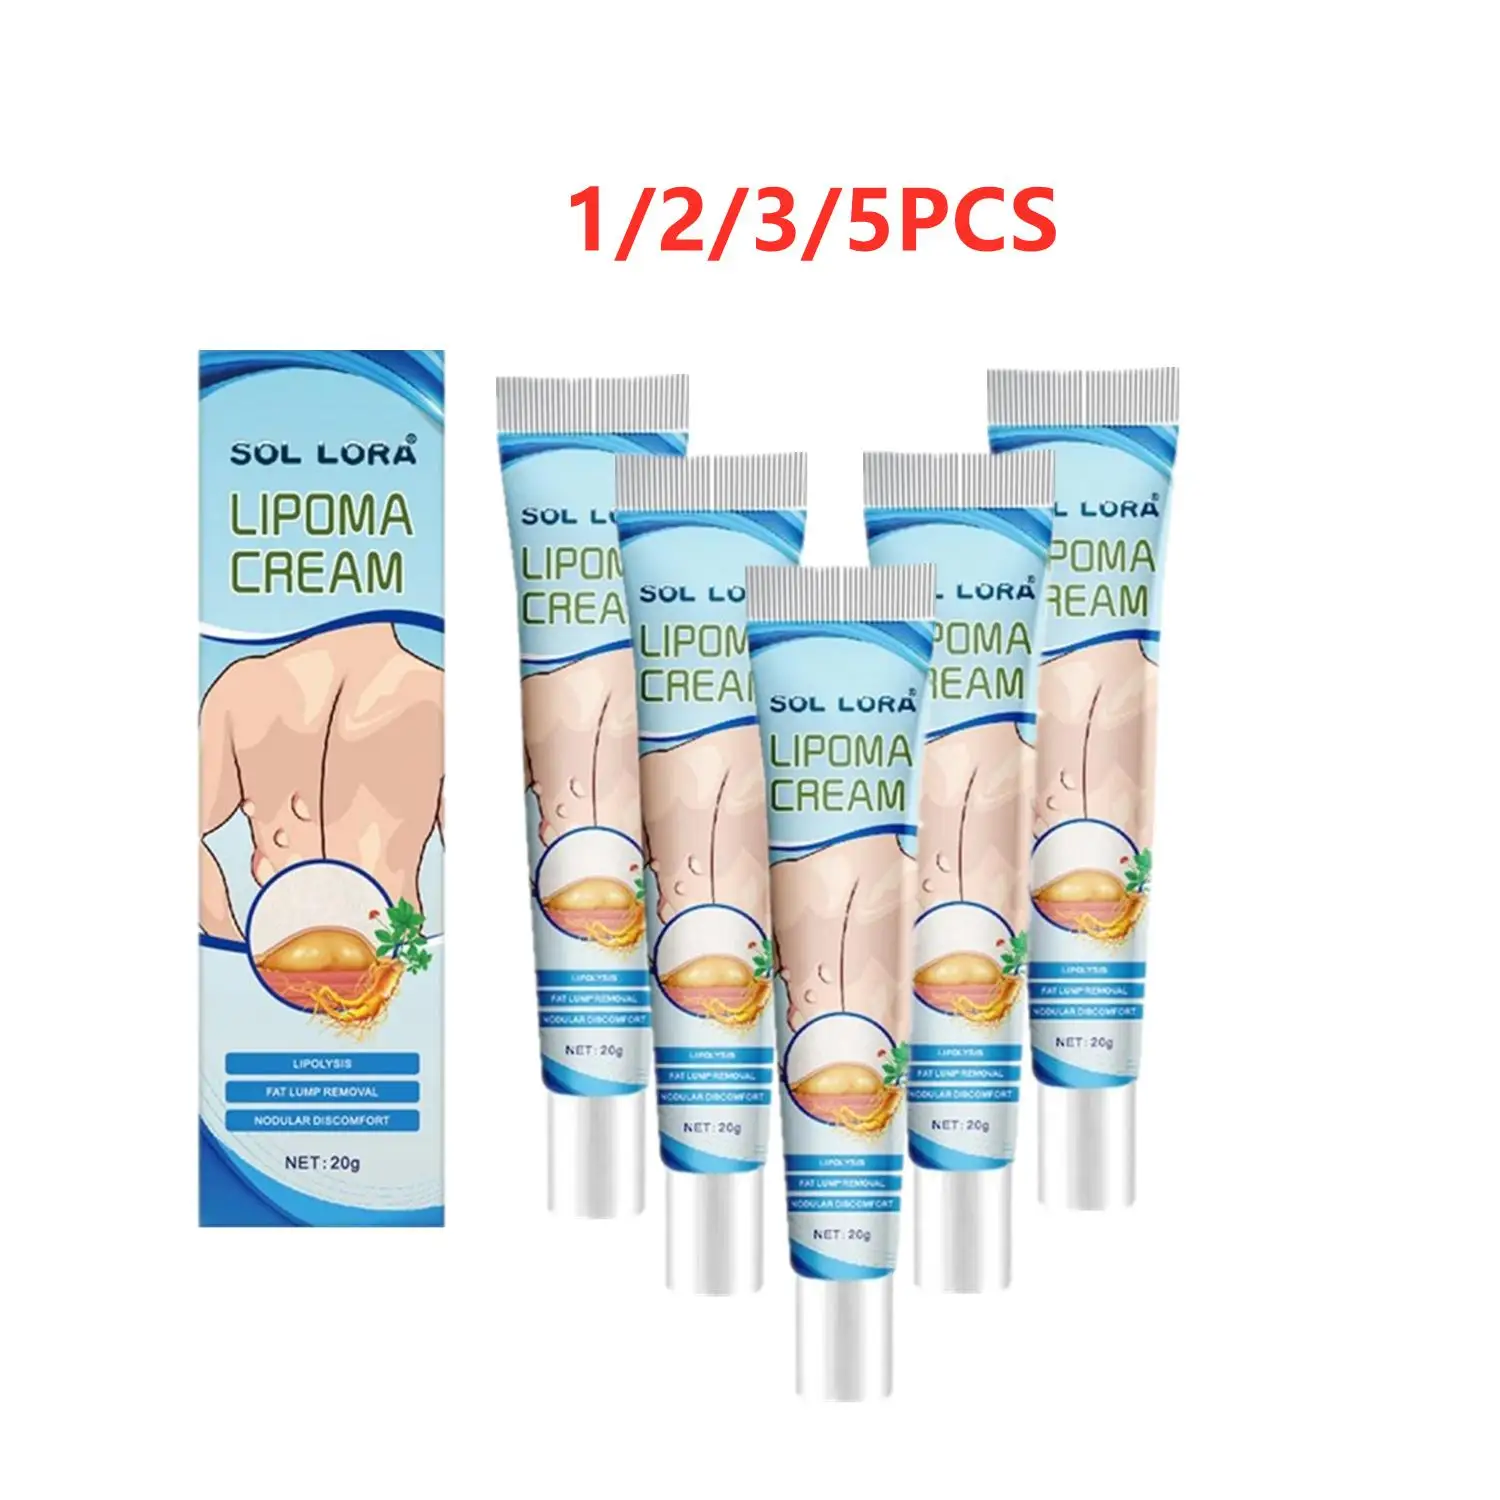 

LOT Lipoma Ointment Effectively Removal Lipoma Fibroids Cream Body Cream Dissolving Fat Easy To Use Herbal Lipoma Removal Cream